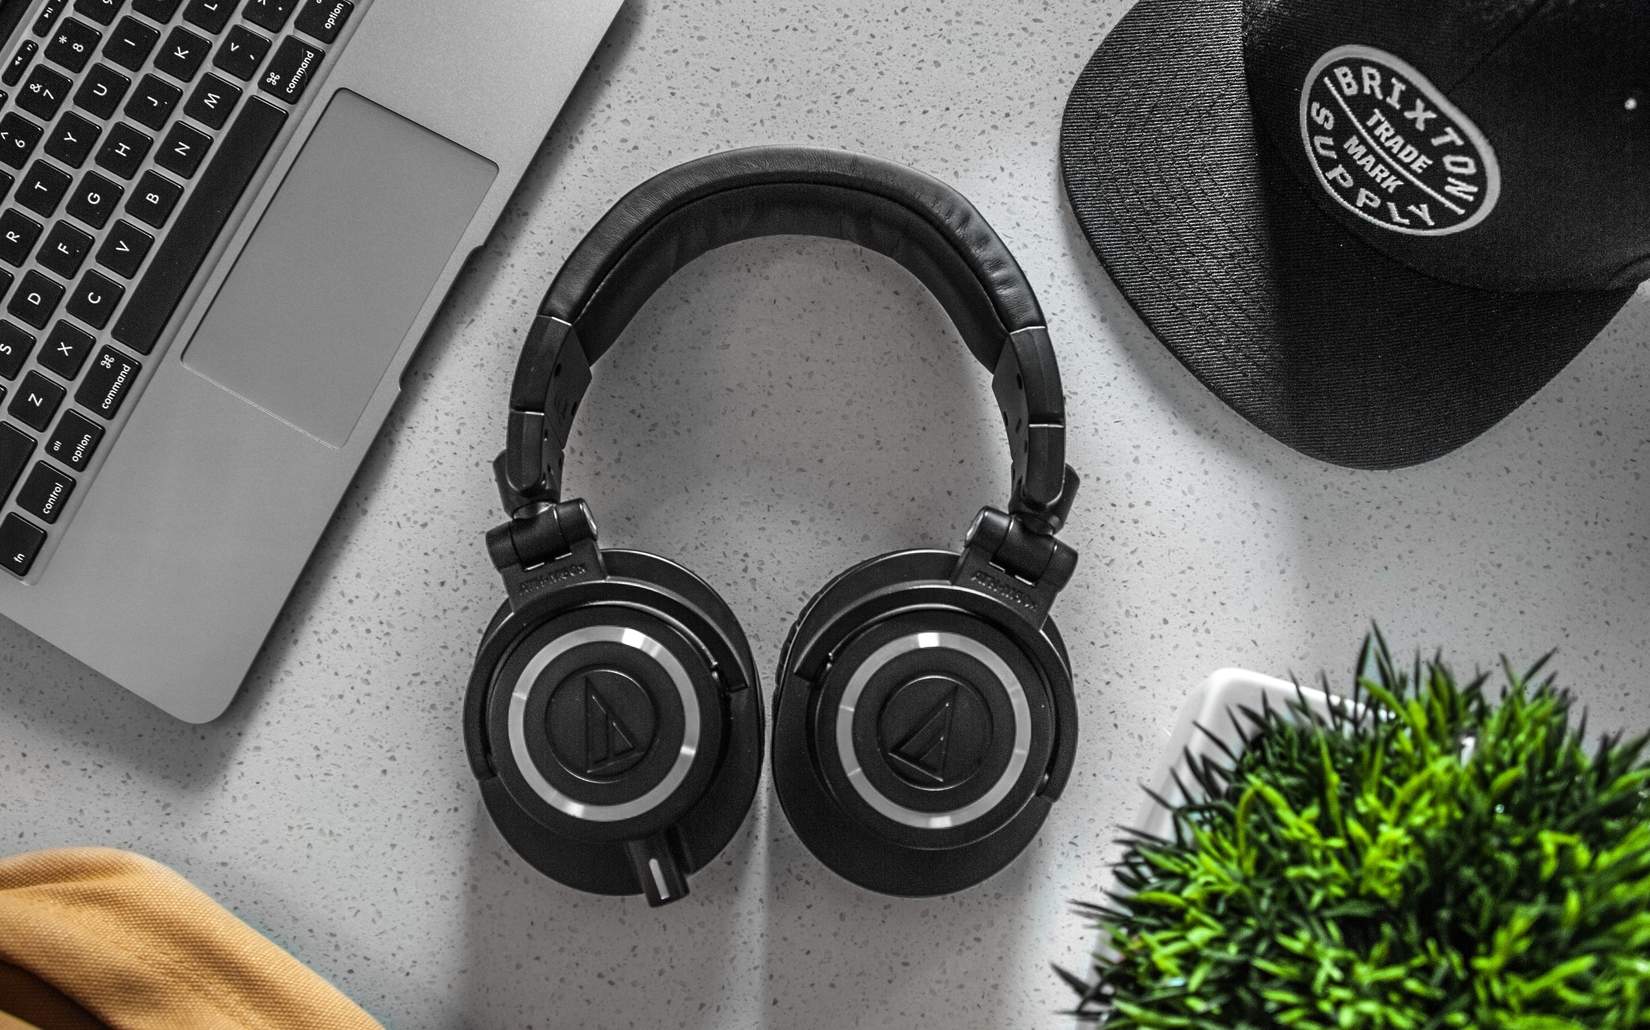 How to Clean Headphones Without Damaging Them